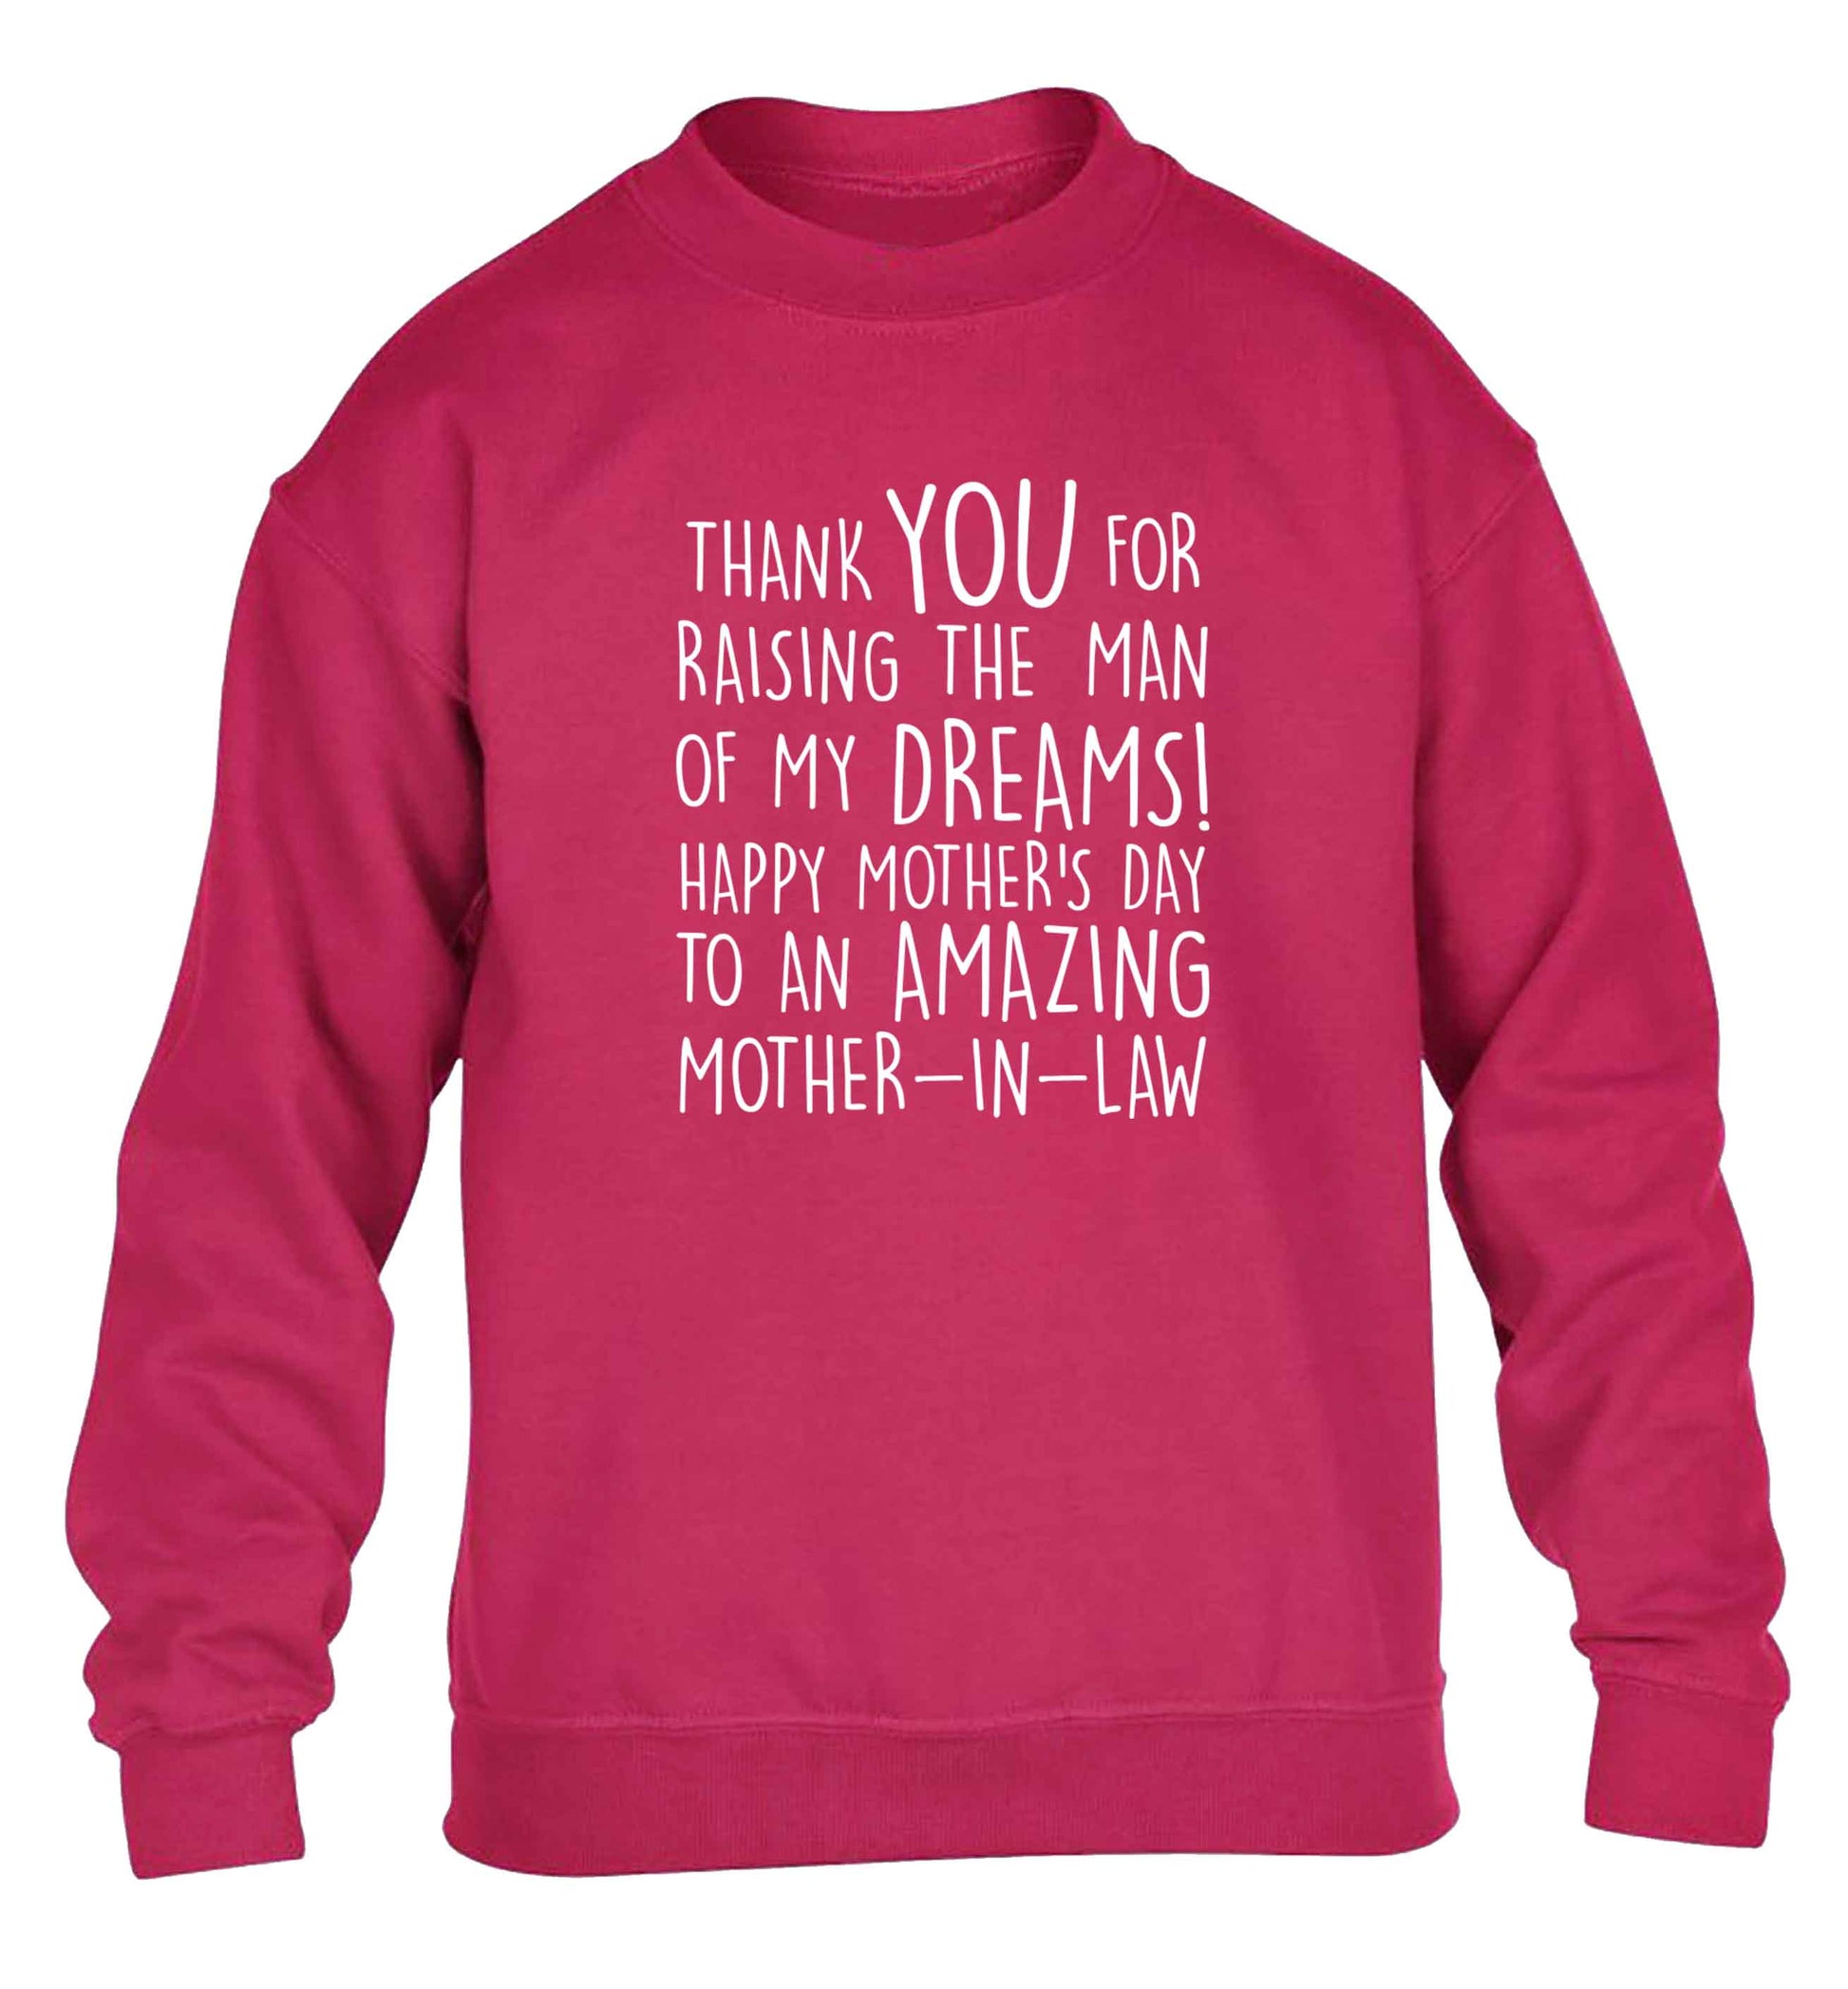 Raising the man of my dreams mother's day mother-in-law children's pink sweater 12-13 Years